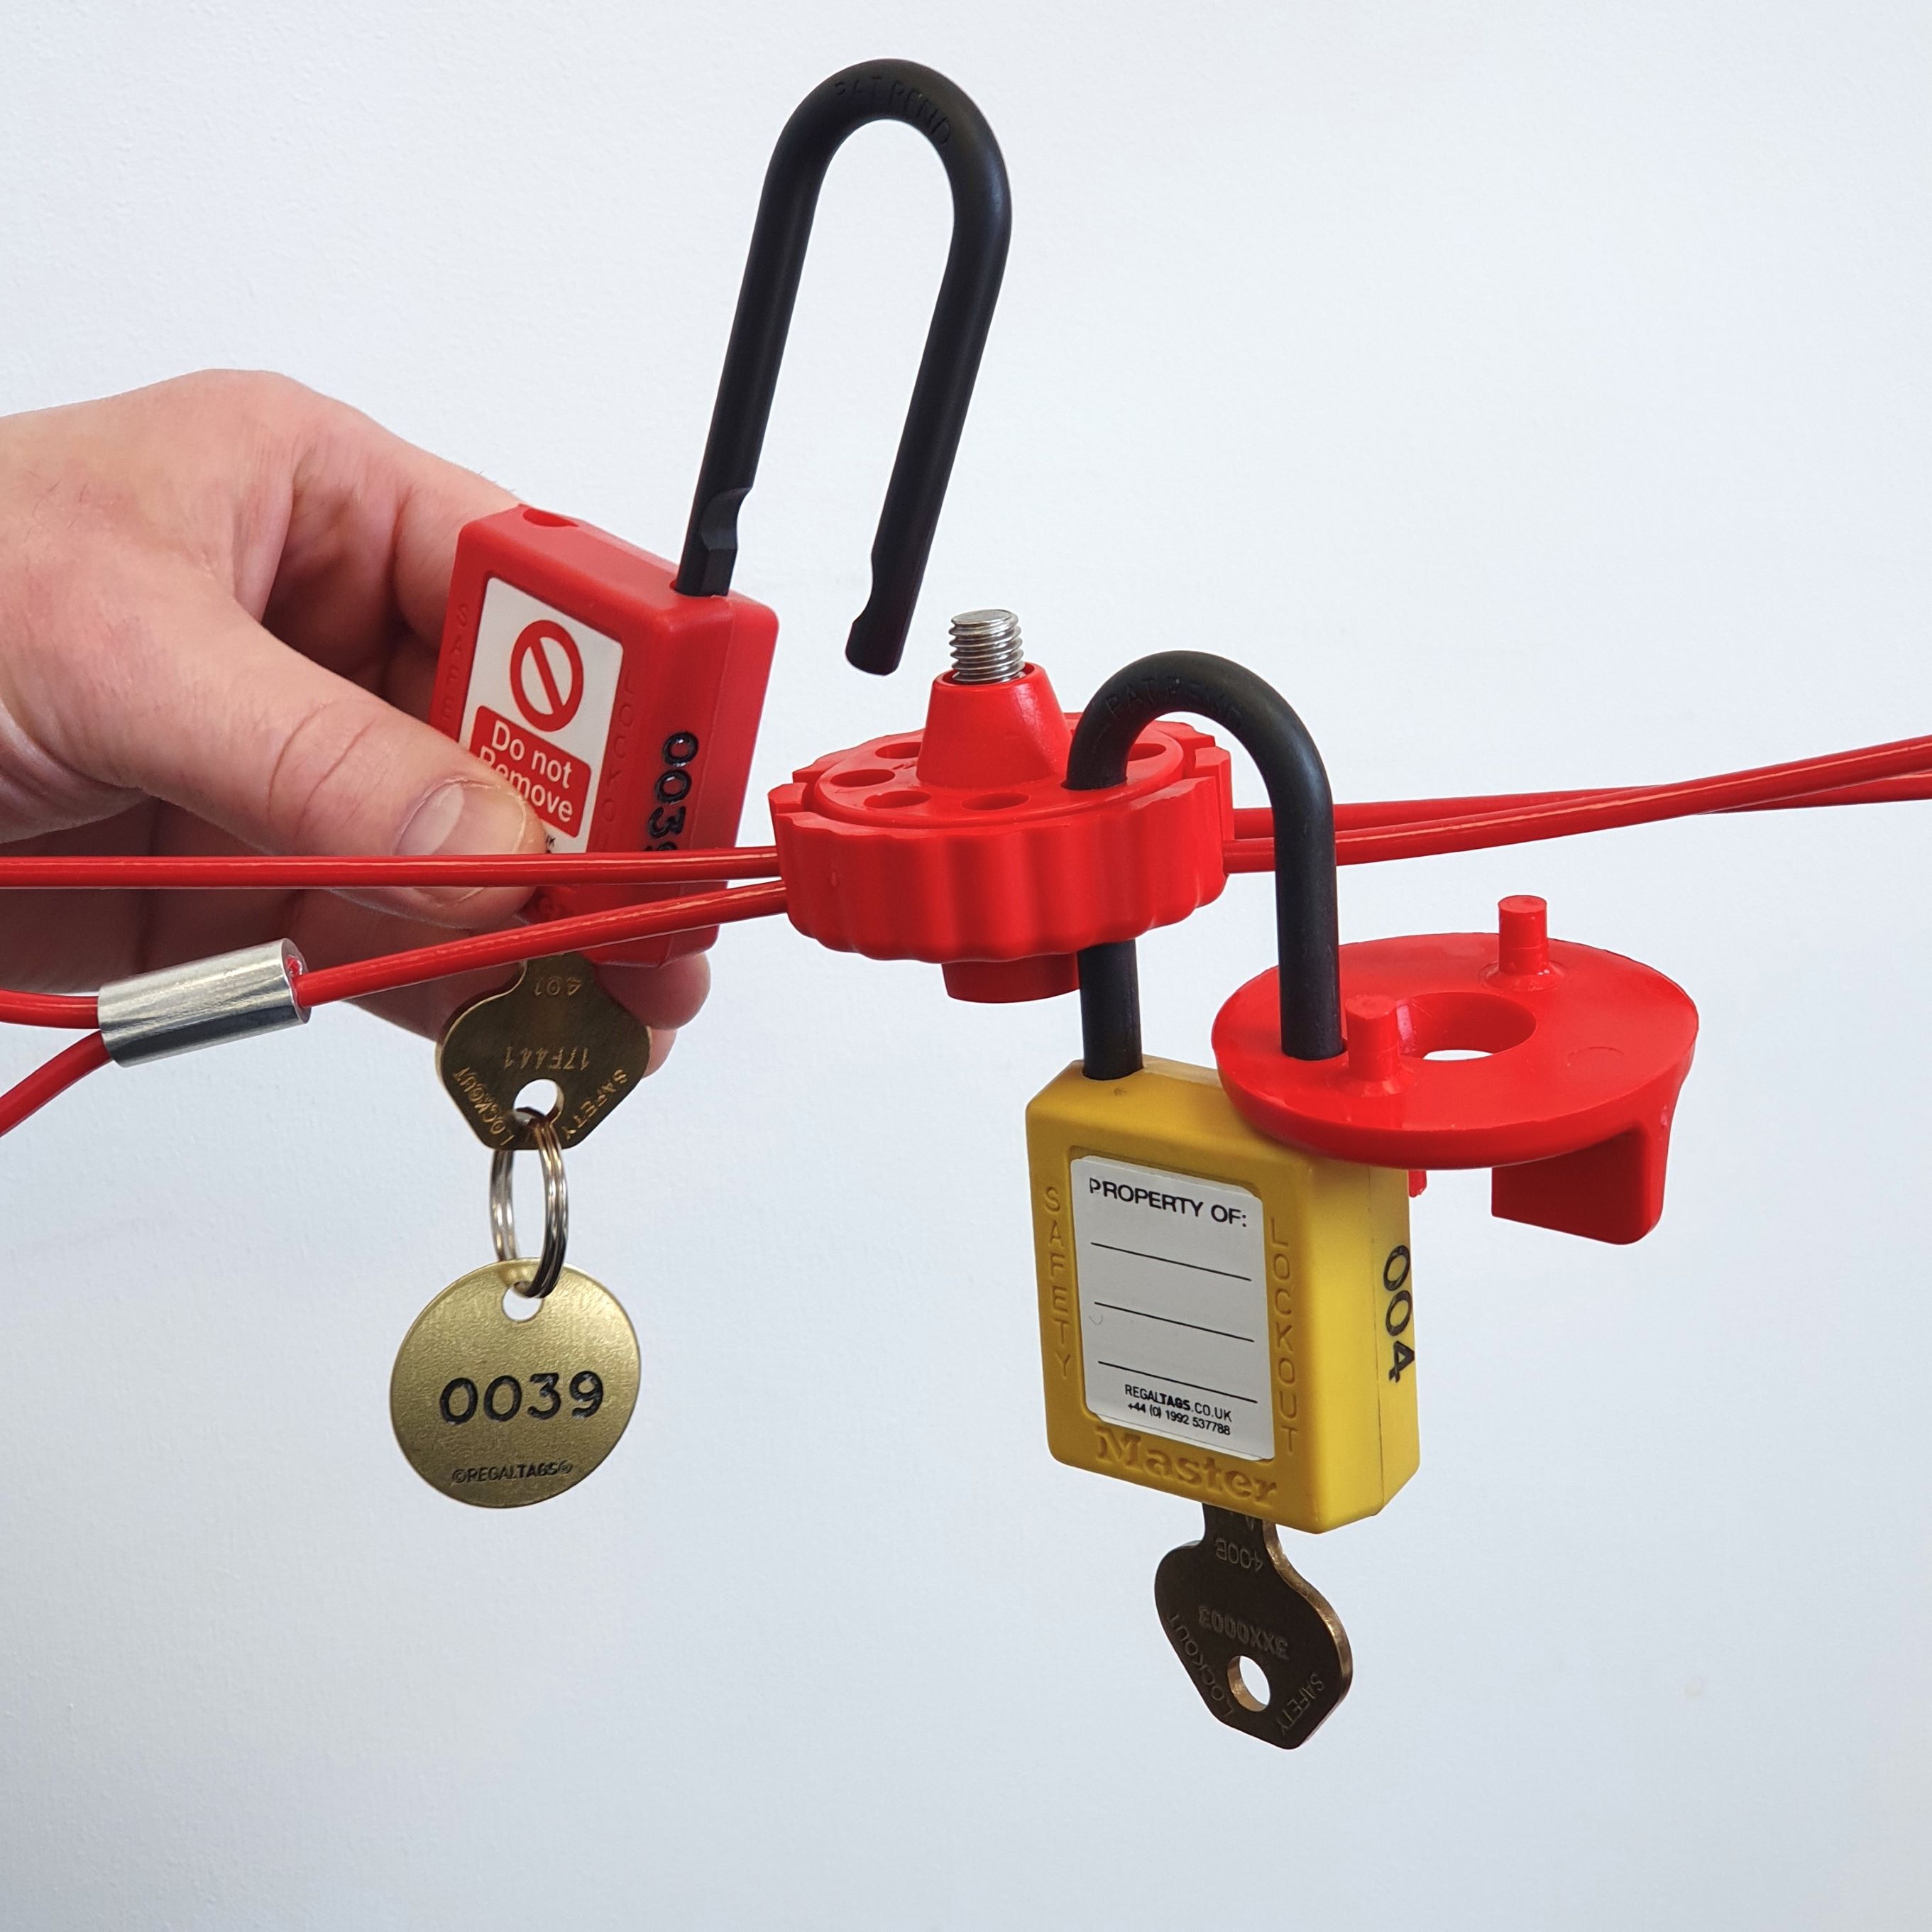 Circuit breaker switch padlock with flexi-cable bility to lock out.